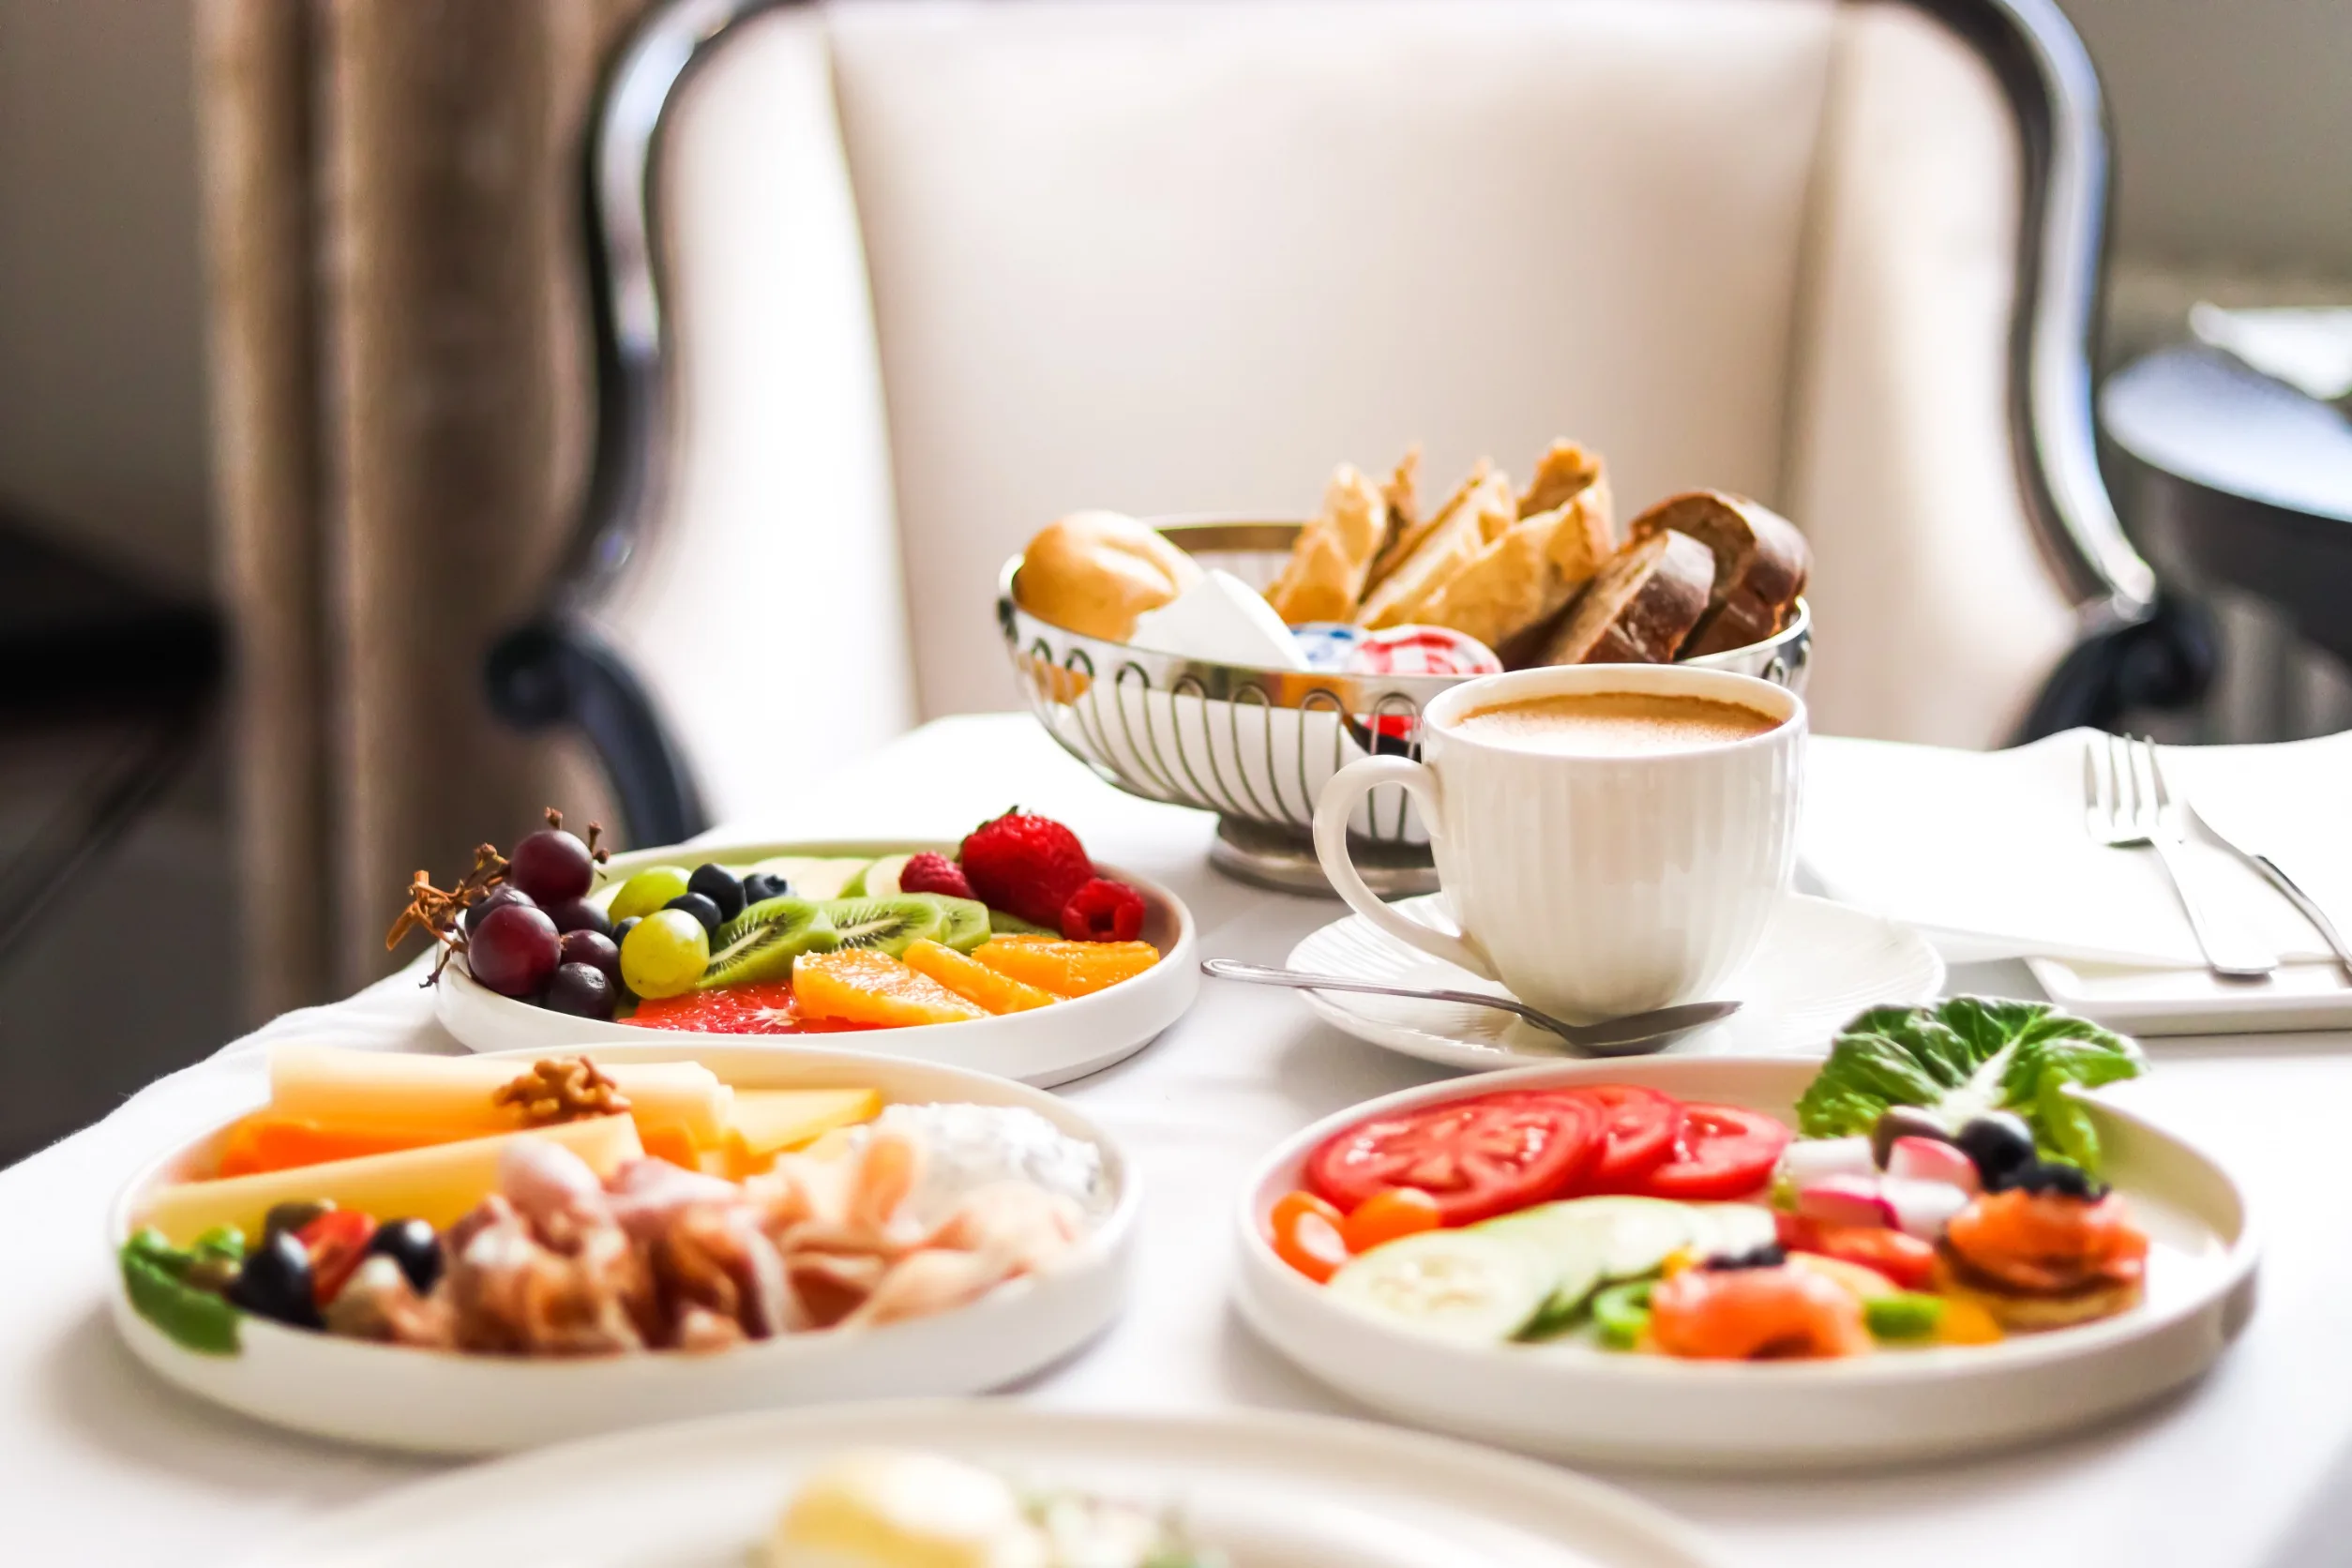 Plates of fruits and vegetables sit in front of a full cup of coffee and a bowl of assorted bread products on a table in a hotel room.